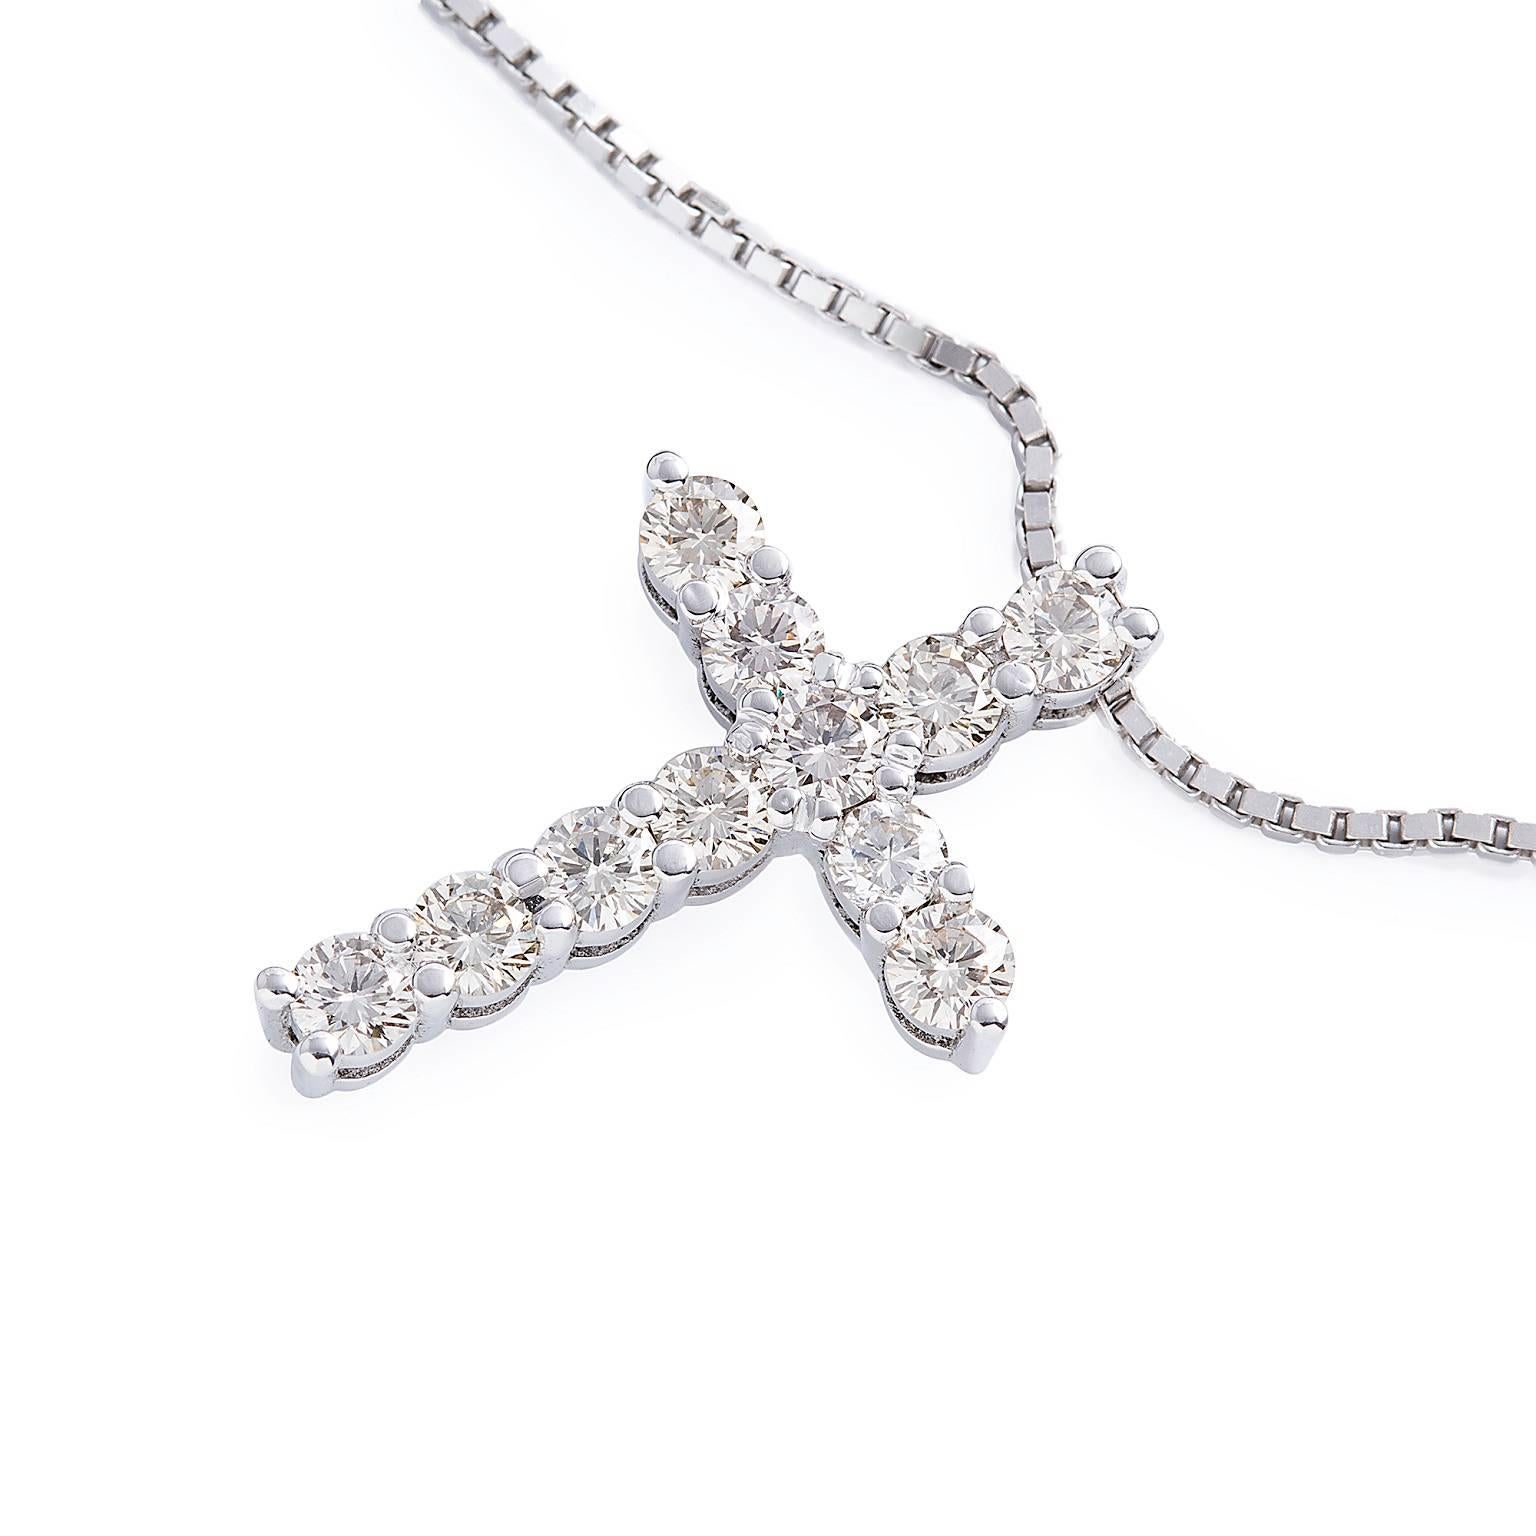 Icona Necklace

This elegant diamond cross pendant has been sold however we are able to remake it with the metal or gemstones of your choice in 15 working days. Please contact us for more information.

This lovely cross pendant in 18ct white gold is